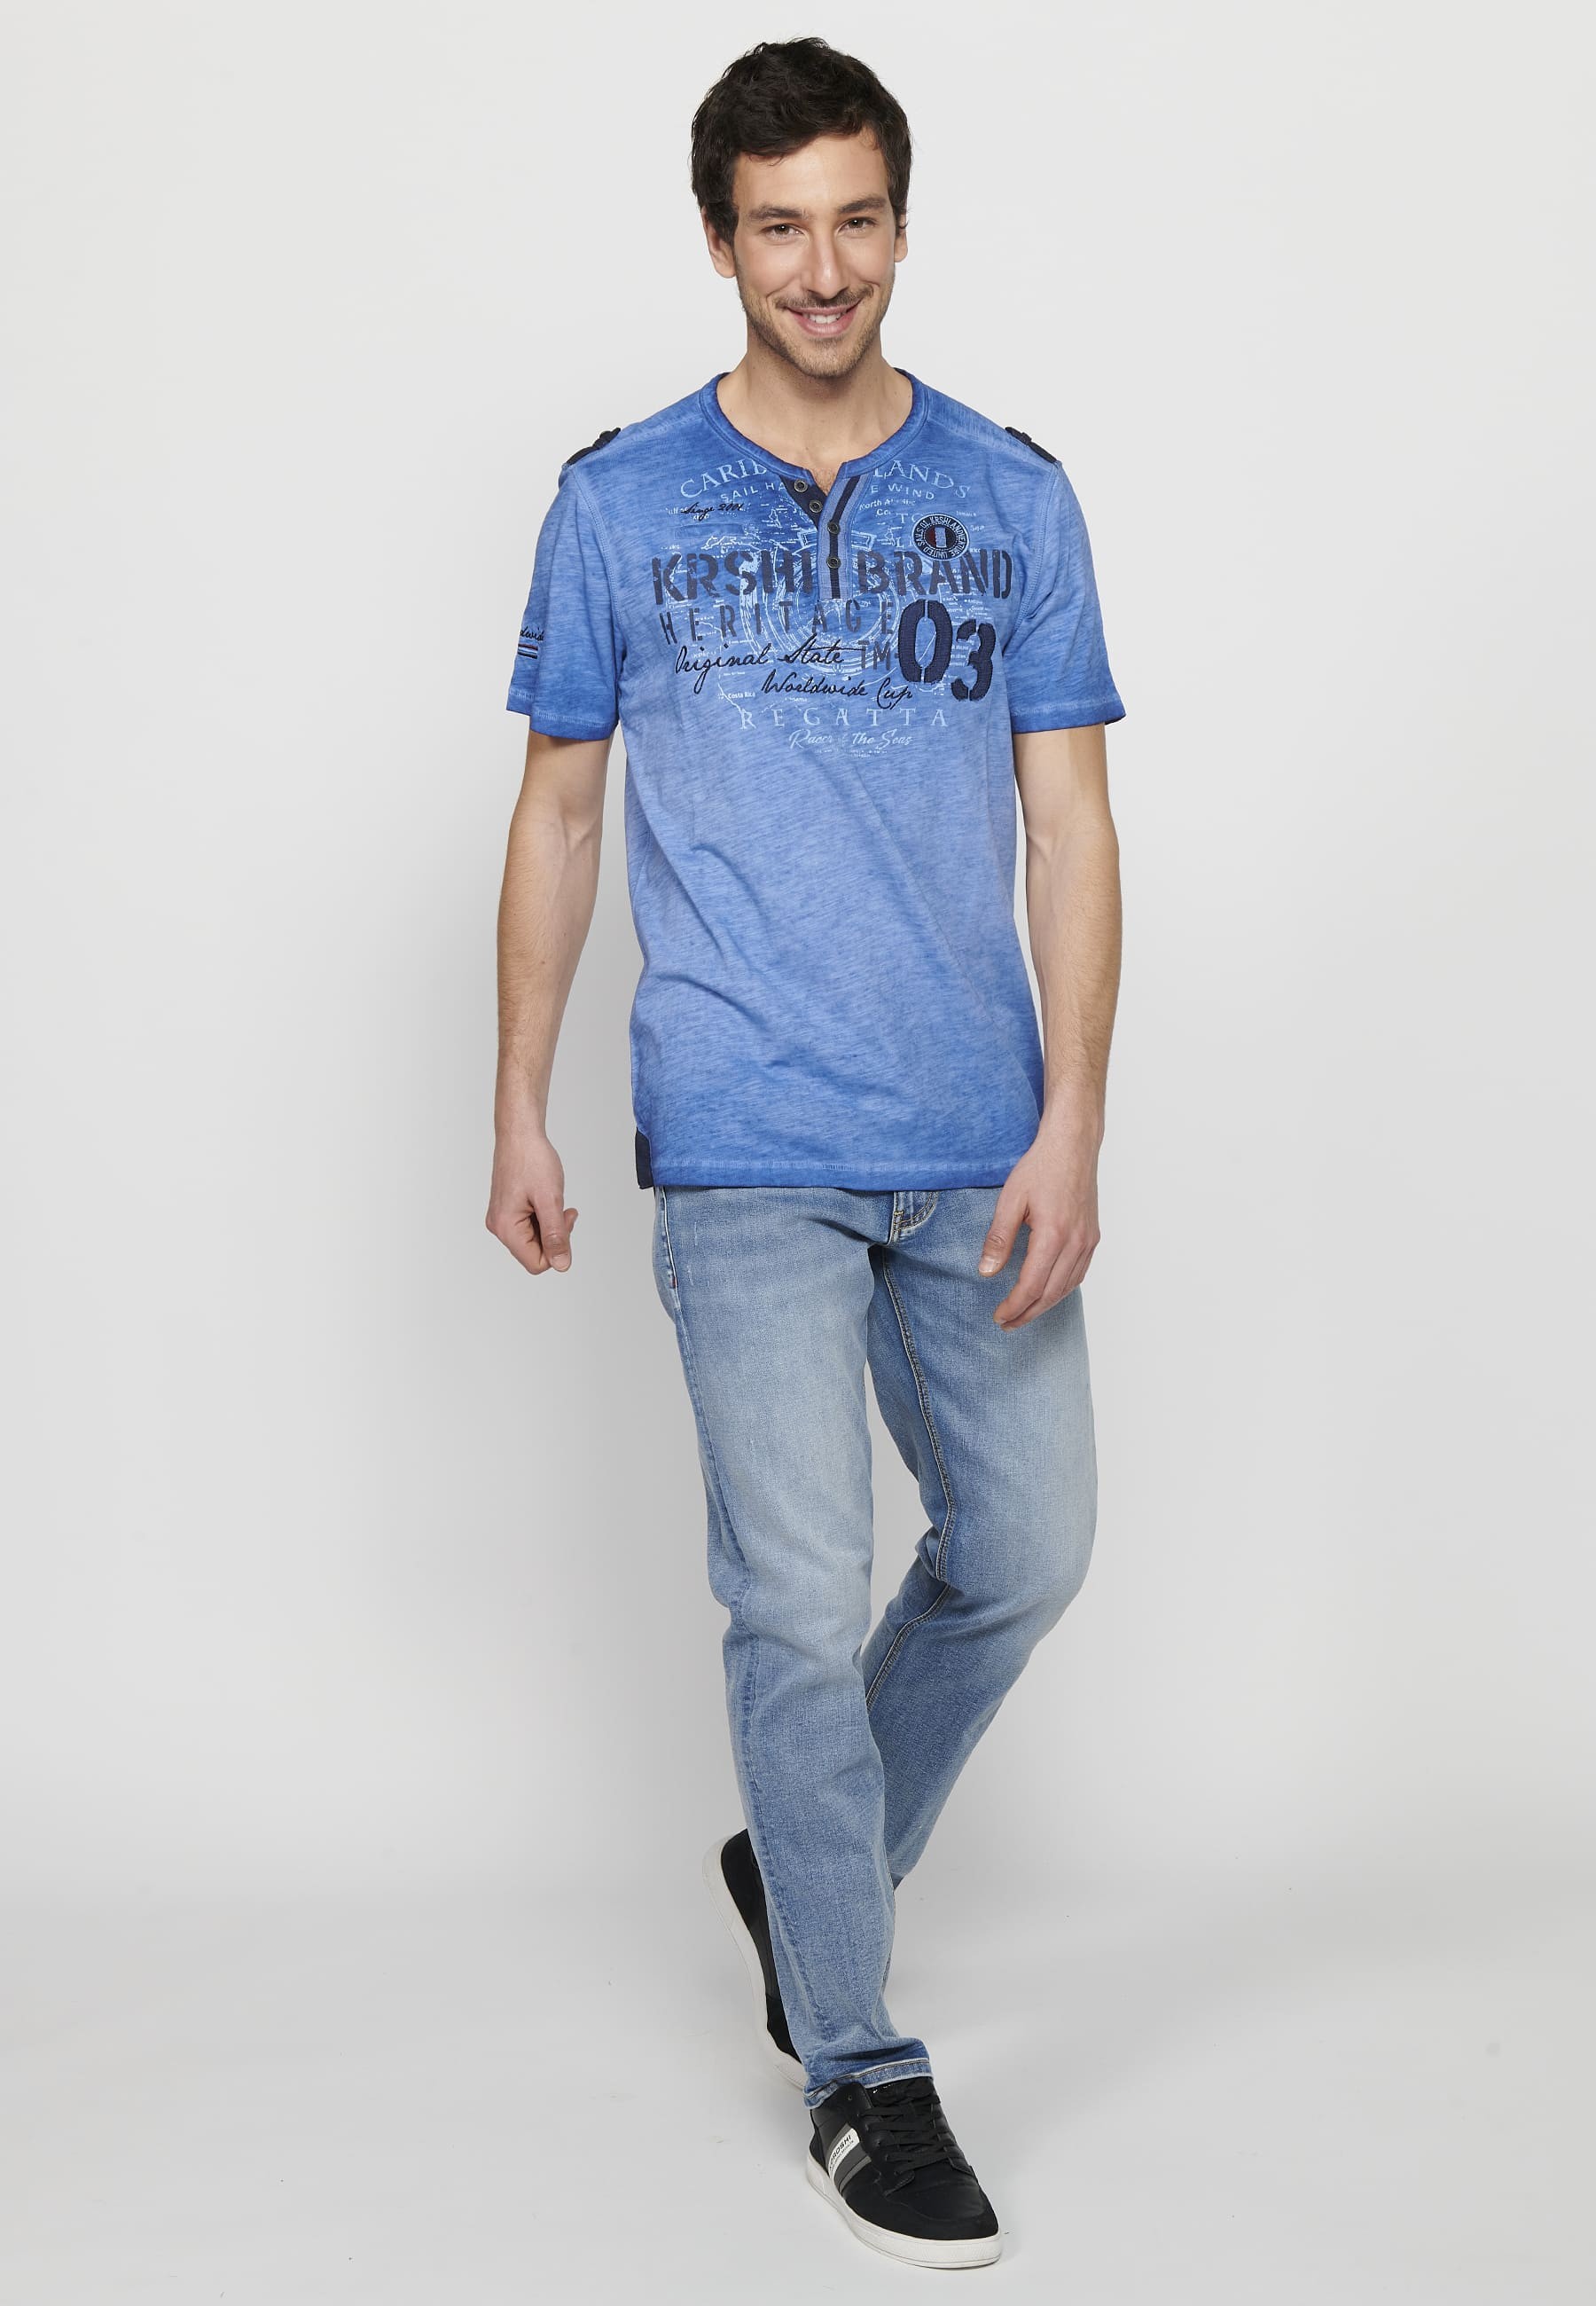 Men's Short Sleeve Cotton T-shirt with Round Neck with Buttoned Opening and blue Front Detail